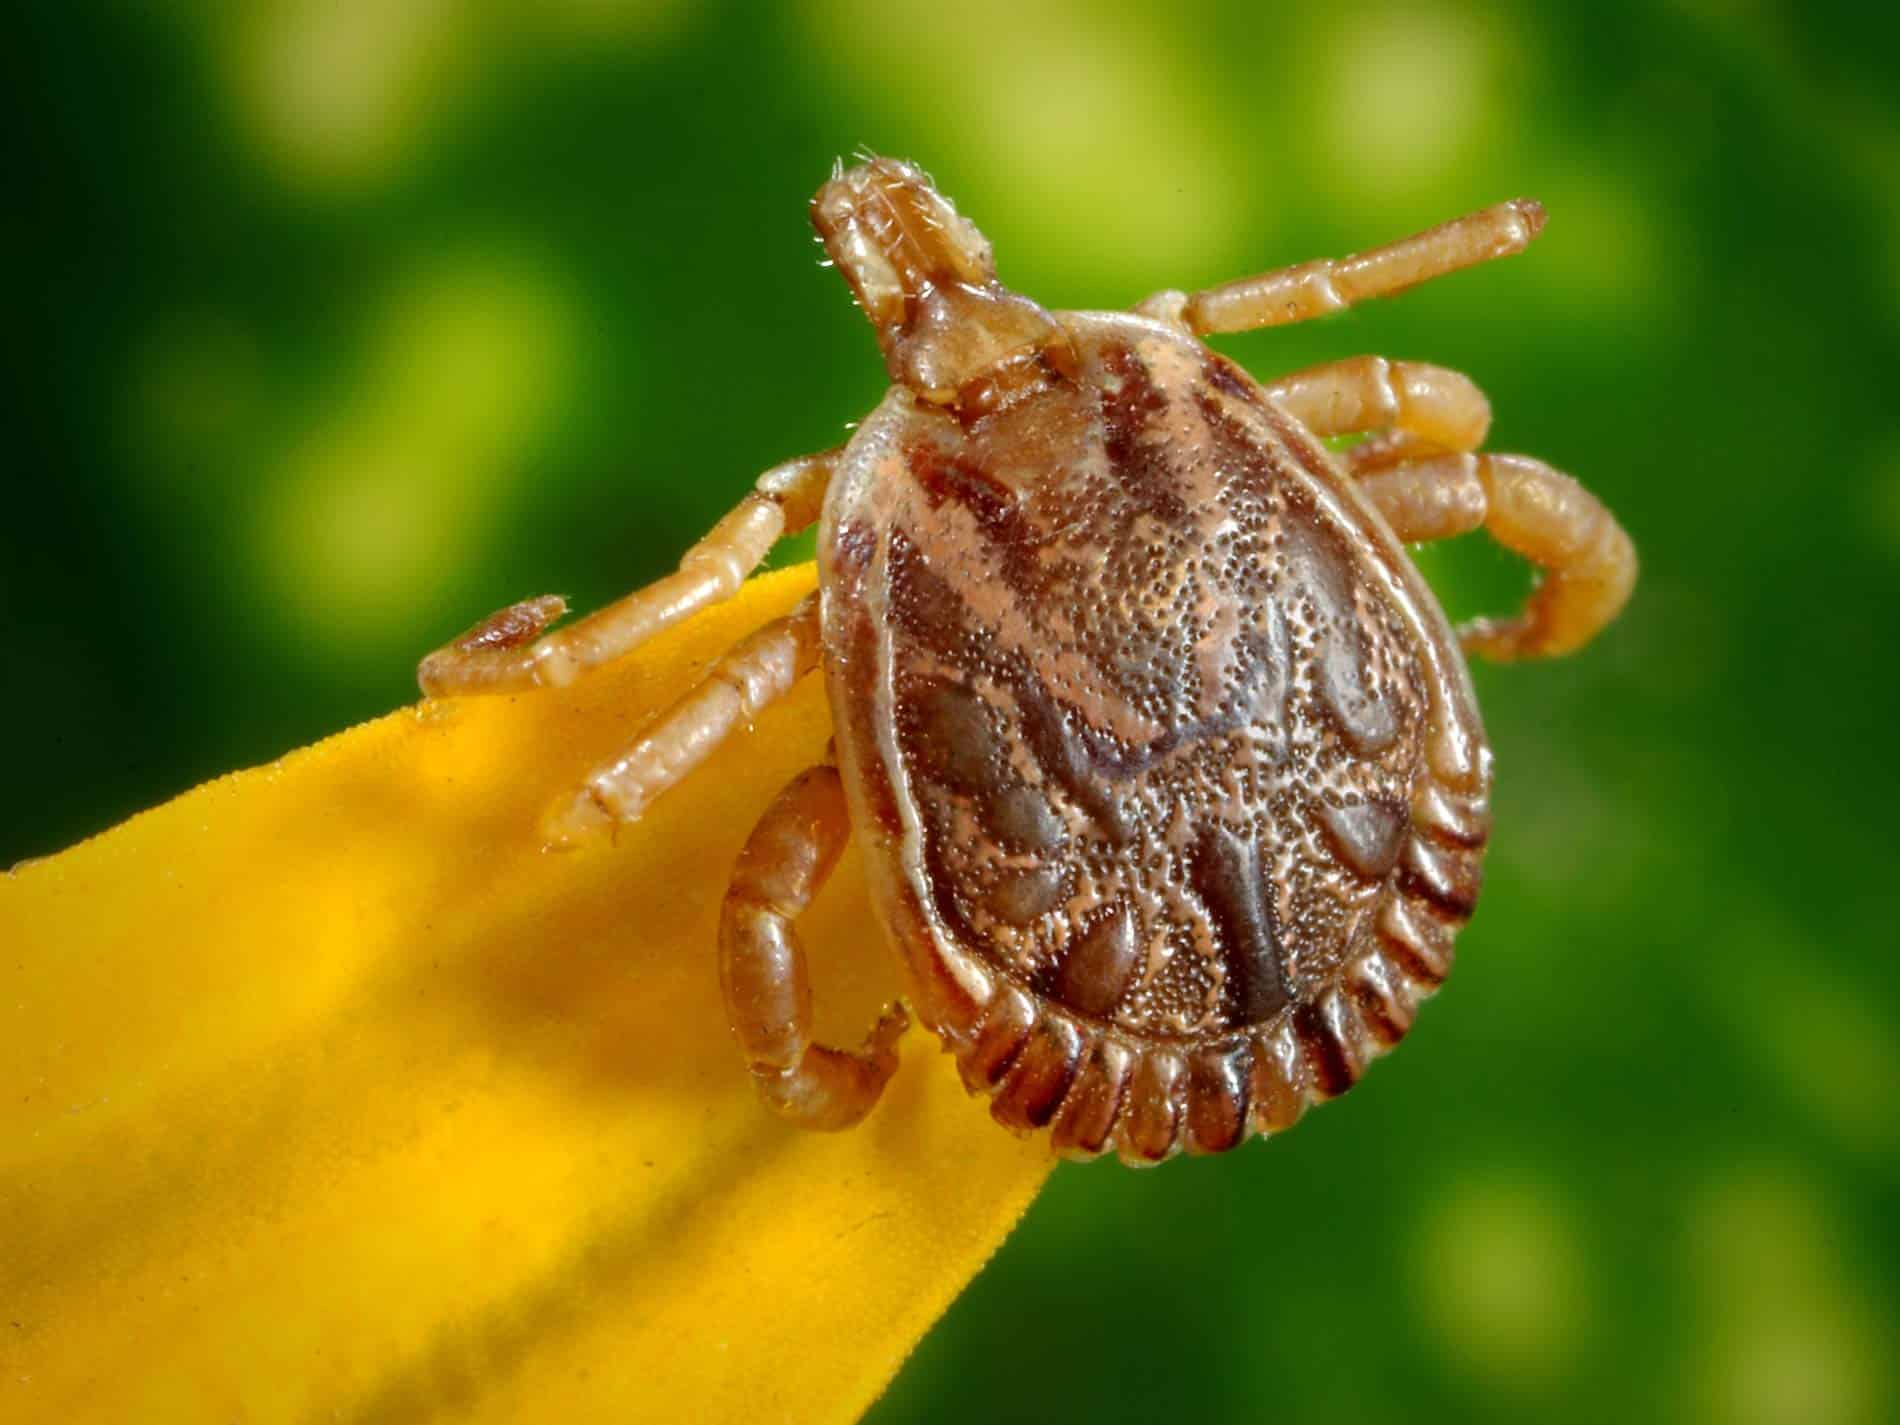 Lyme Disease Prevention and Tick Removal Kit